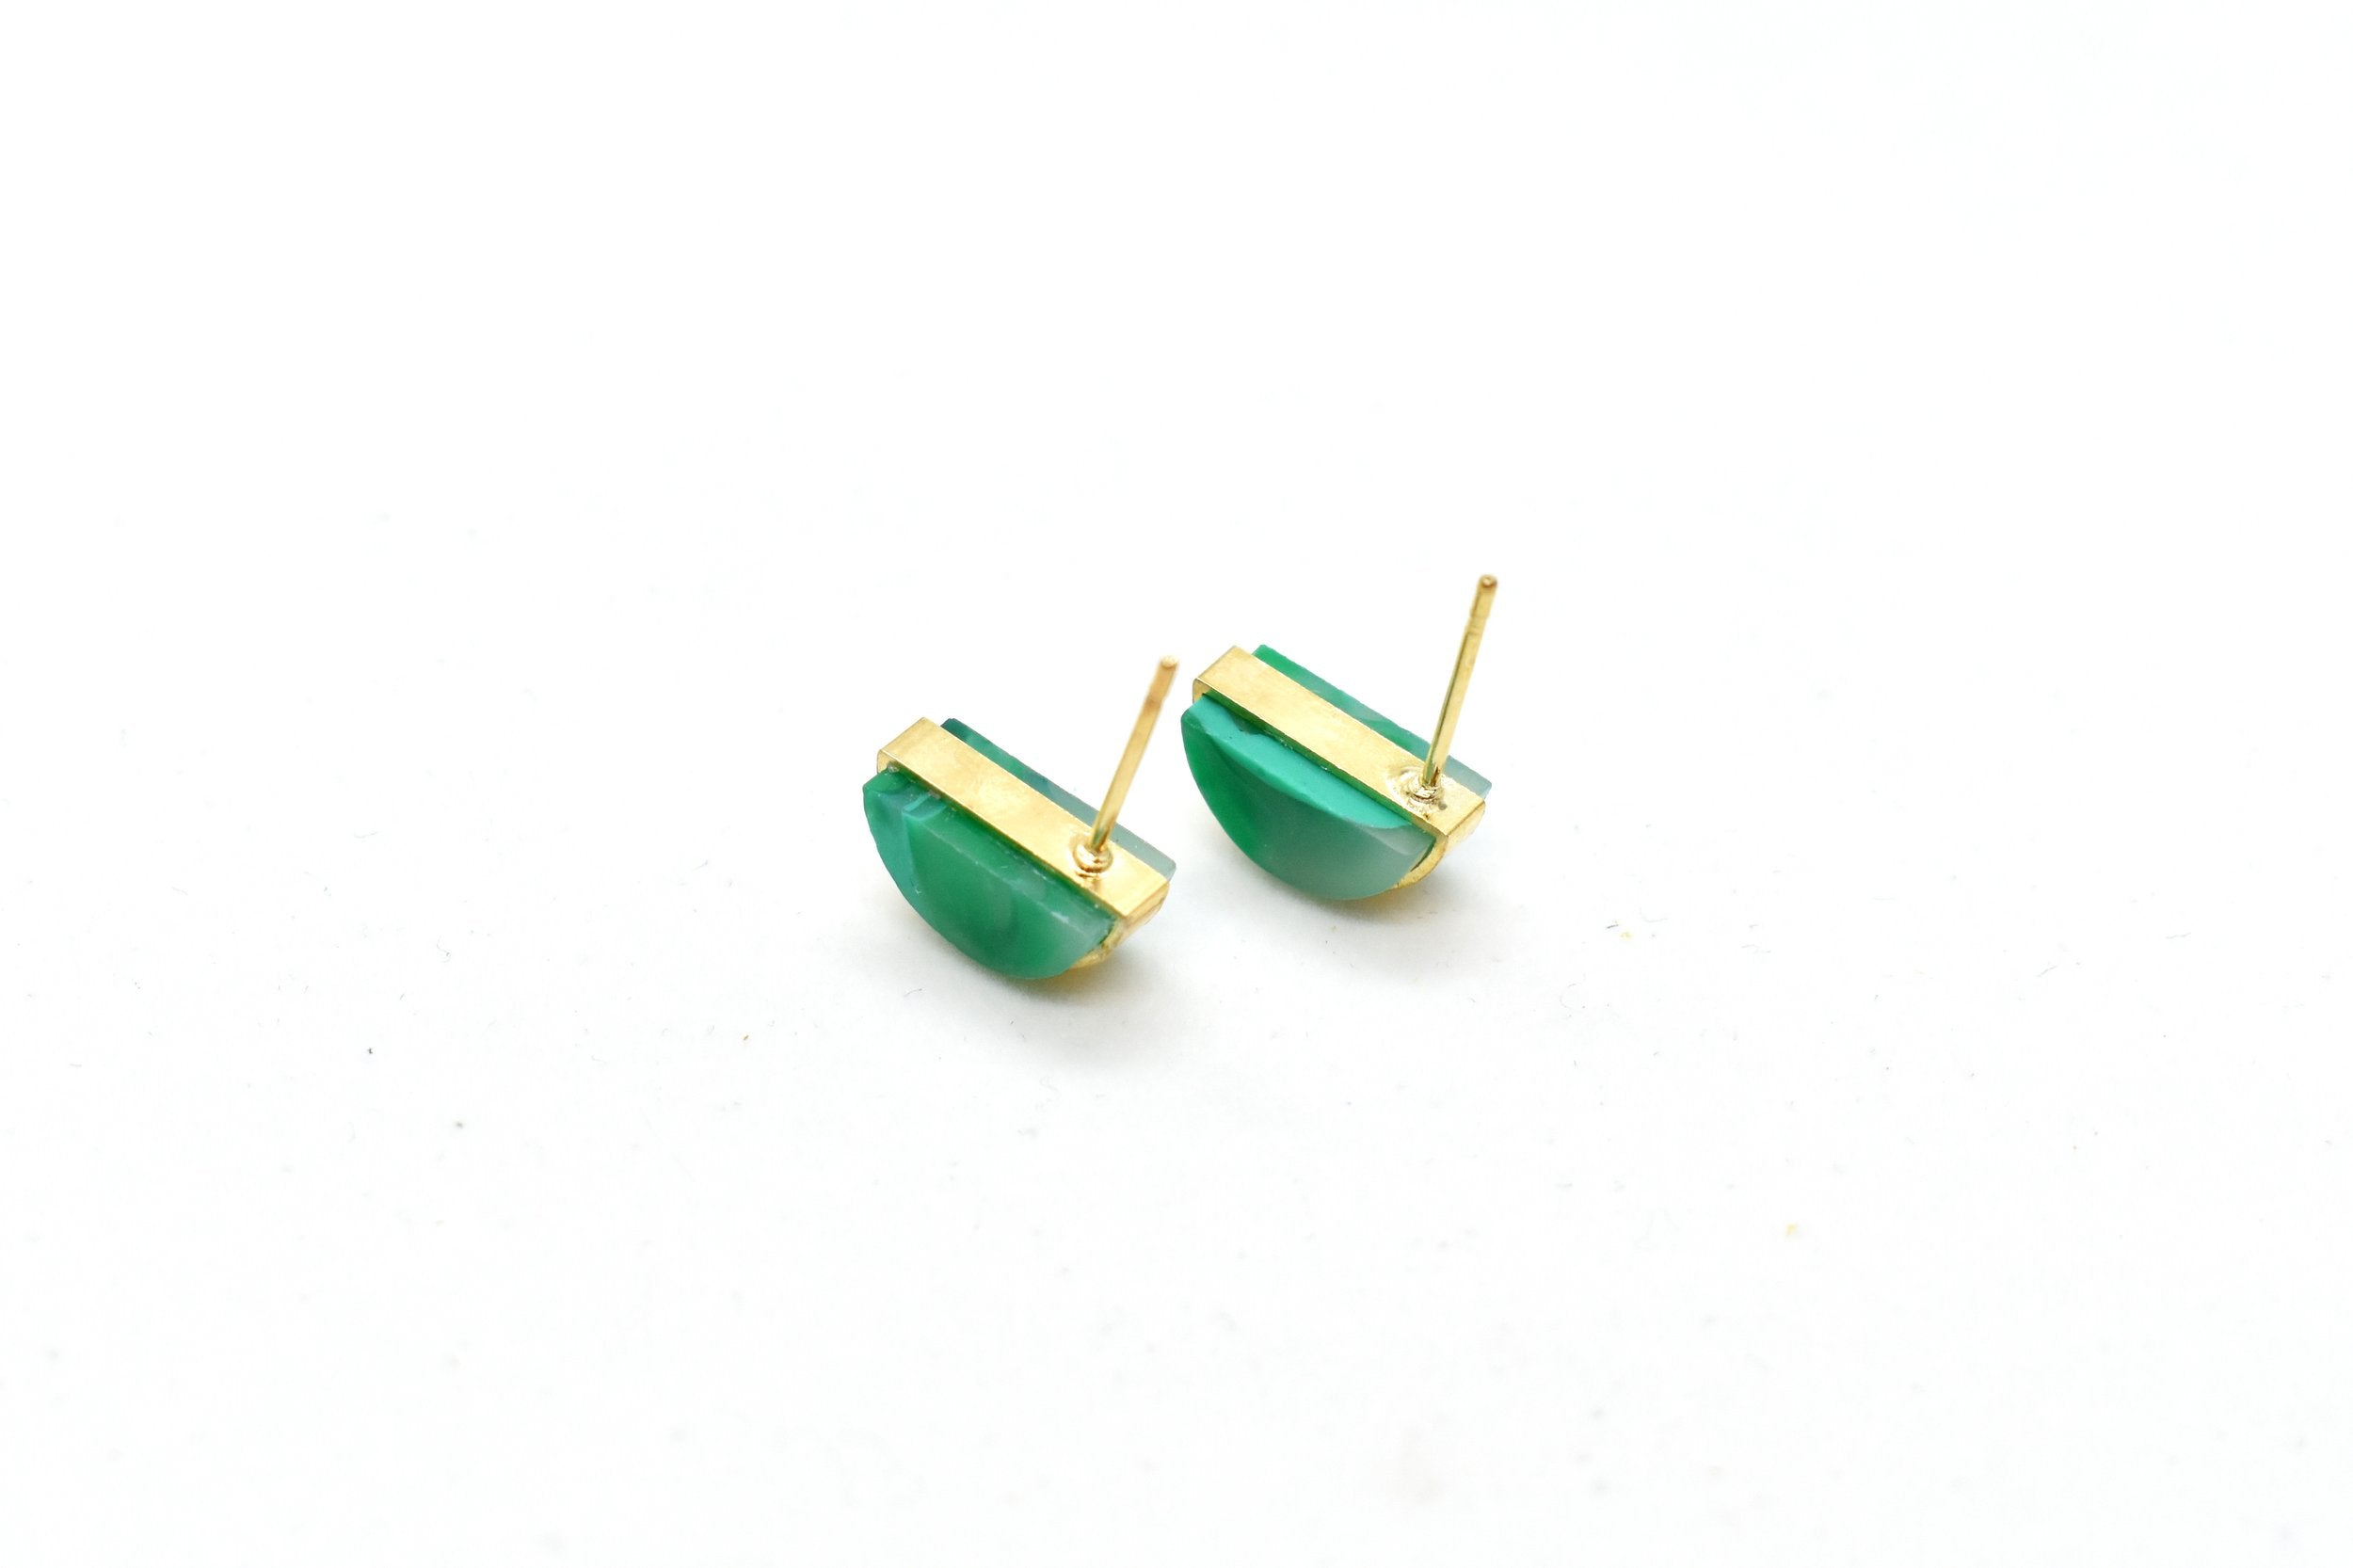 earrings showing the back of studs with surgical steel, hypoallergenic posts, marbled translucent green geometric shape studs May jewelry birthstone earrings gifts for her